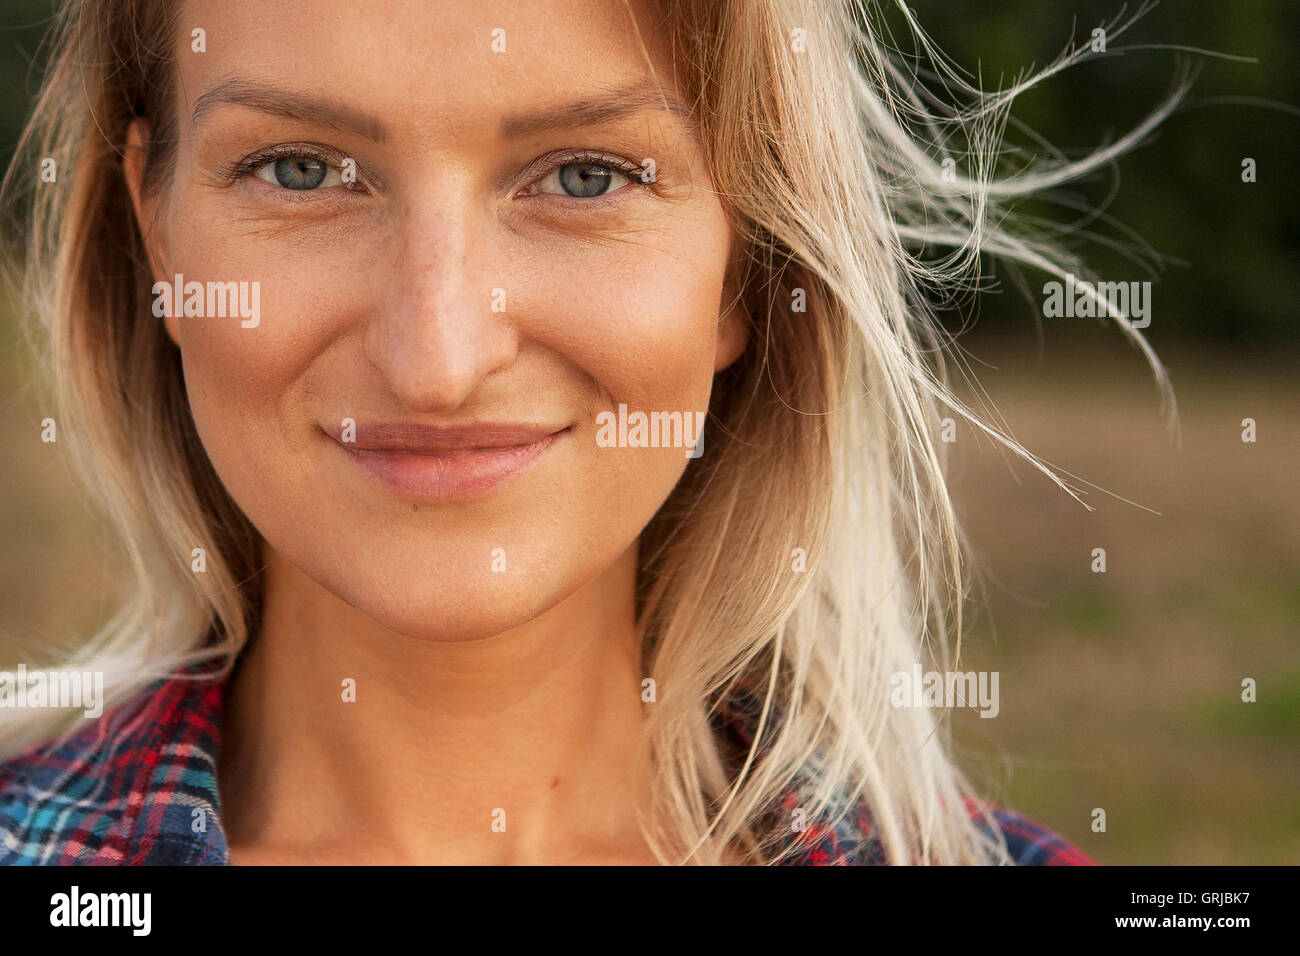 beautiful sunny portrait of a girl. Face smiling girl outdoors Stock Photo